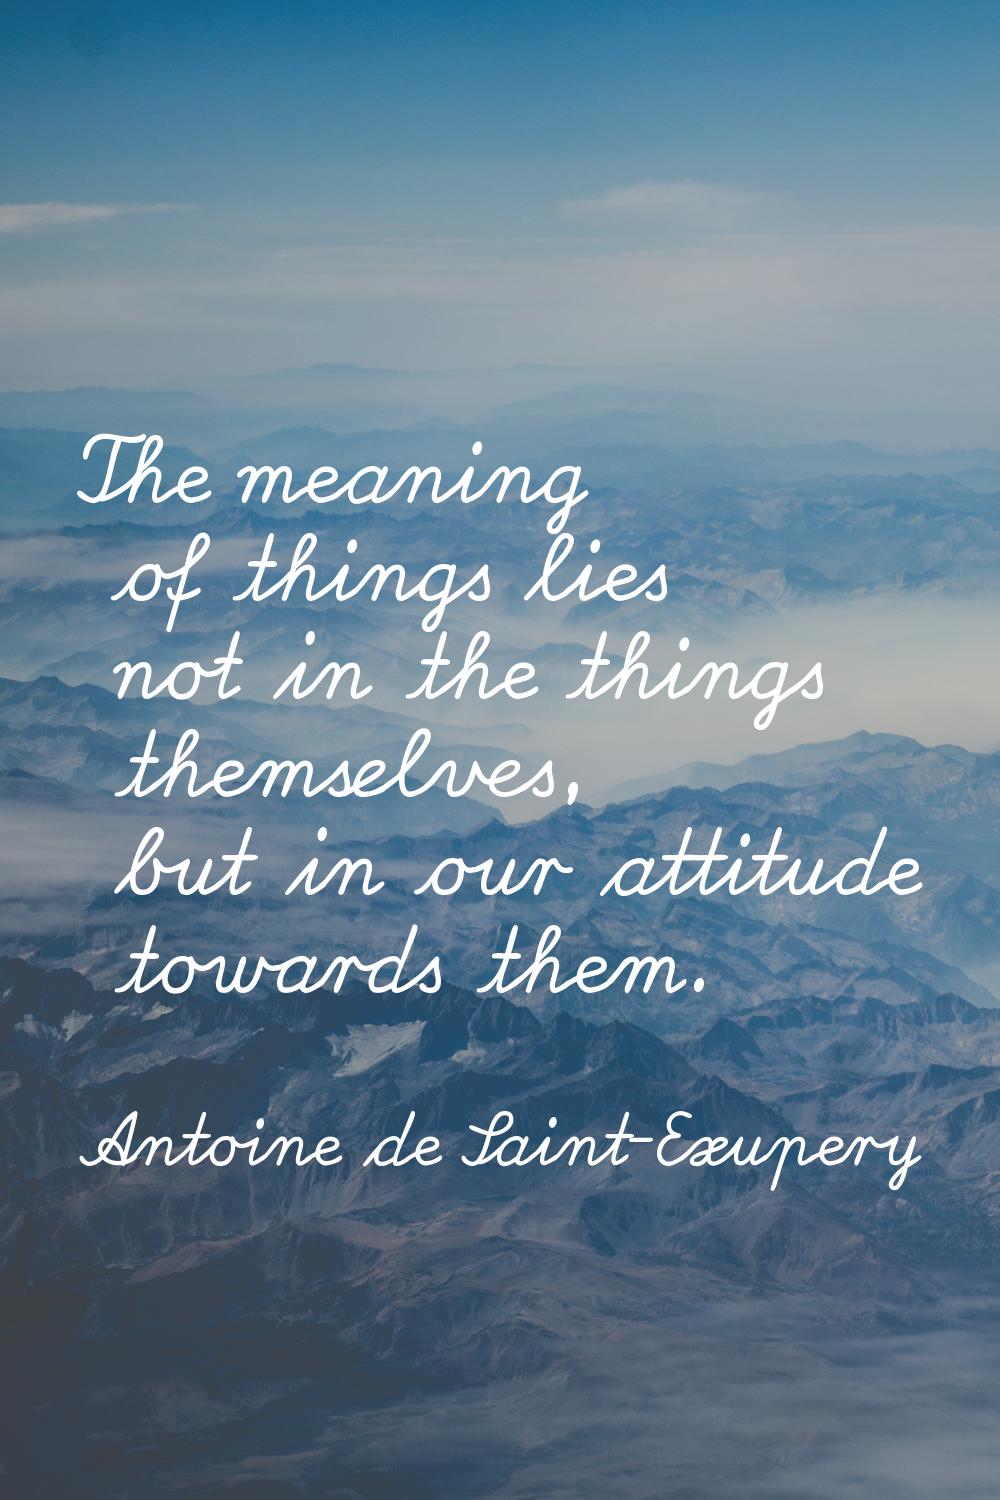 The meaning of things lies not in the things themselves, but in our attitude towards them.